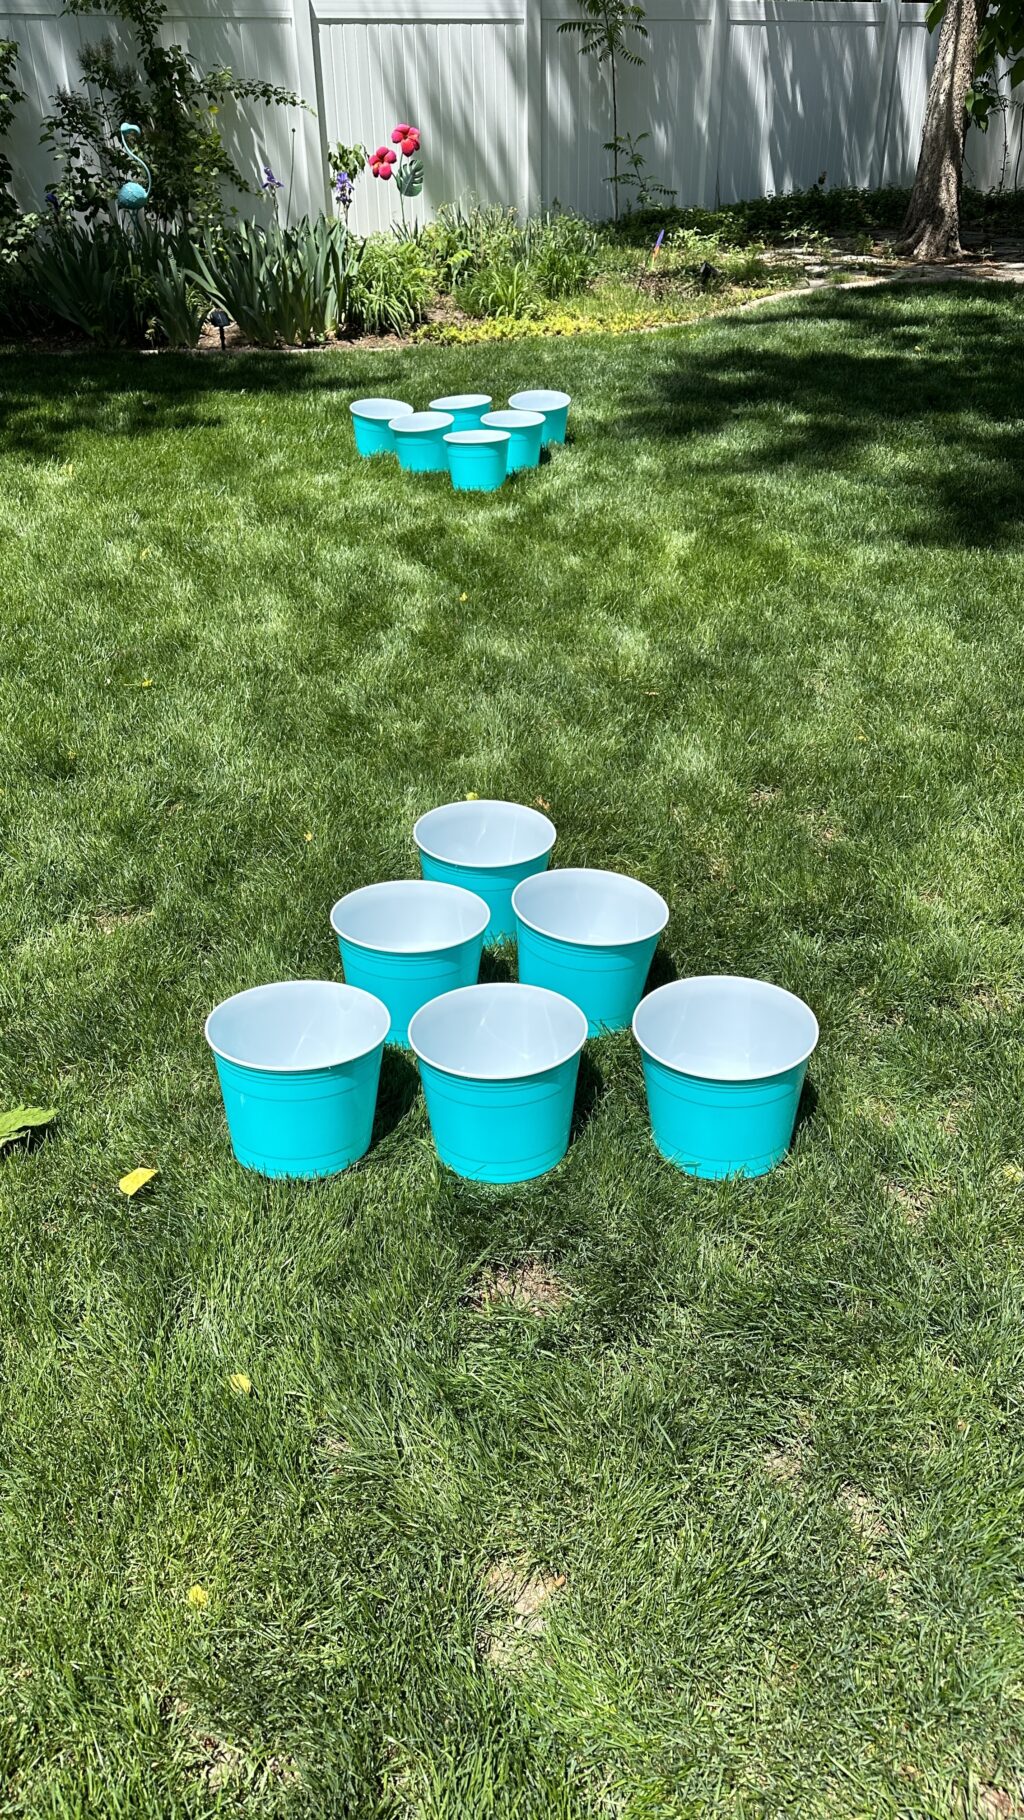 giant yard pong set up in the lawn